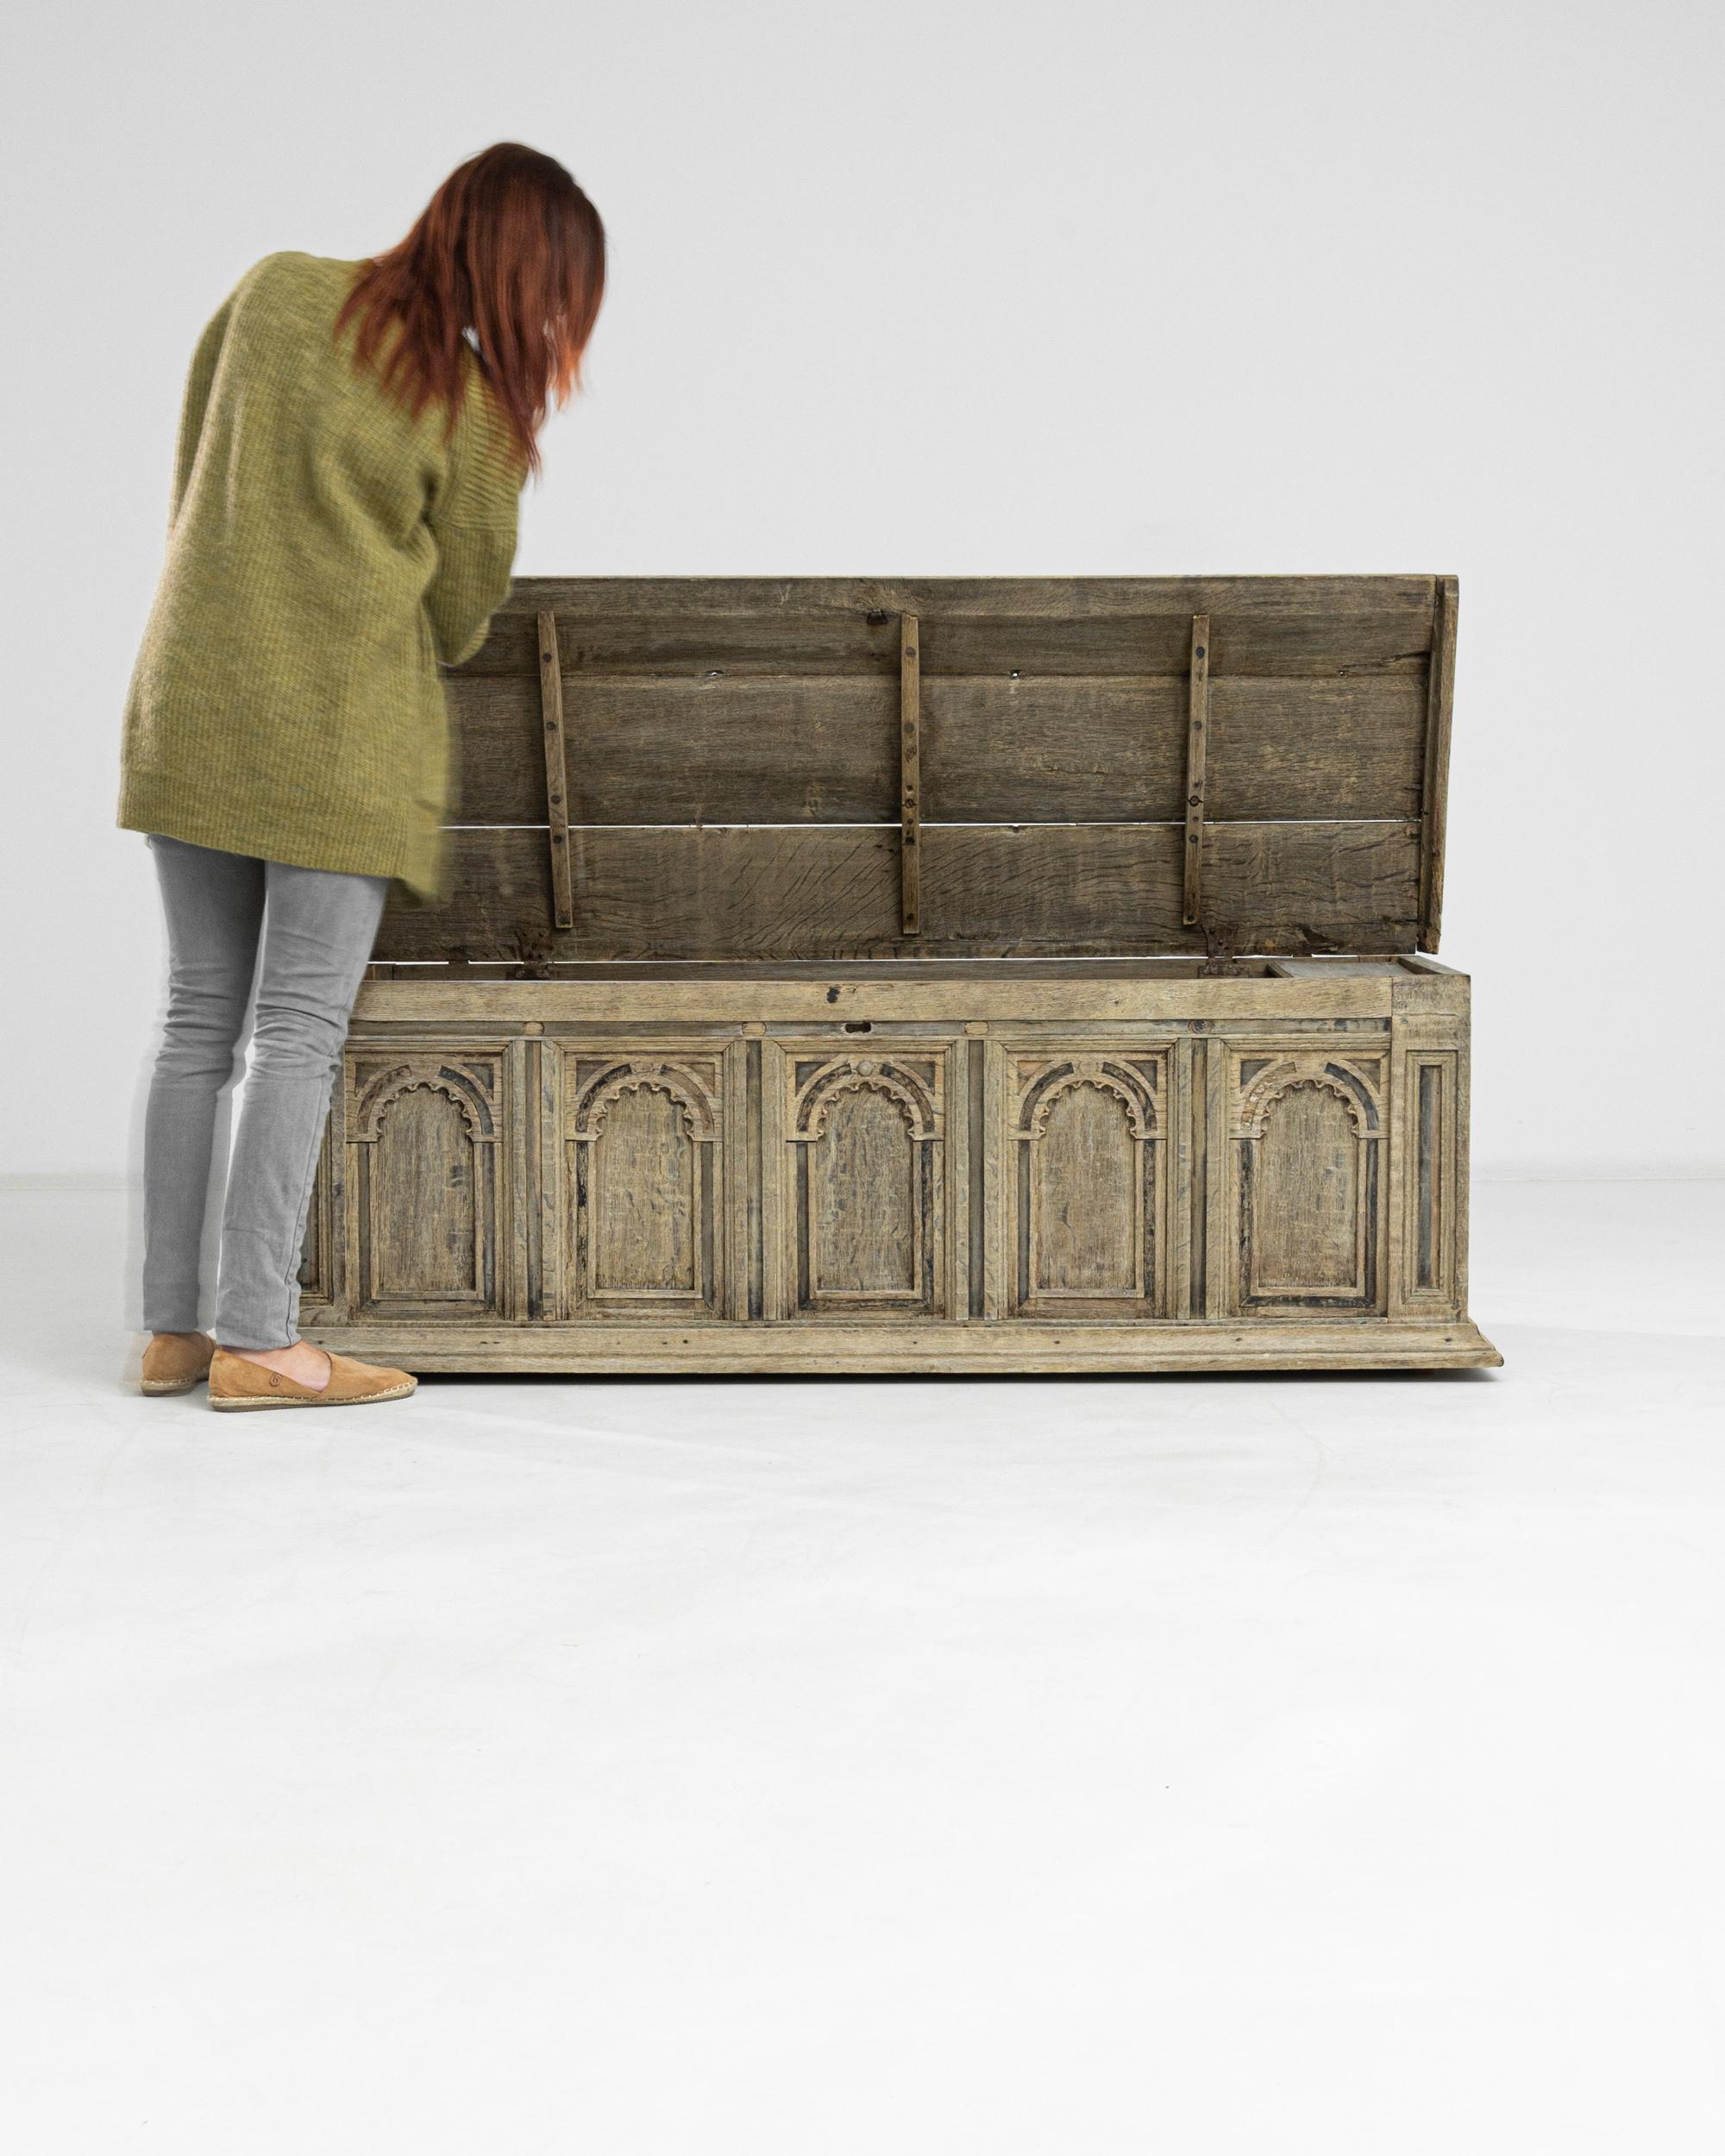 Ample and solid, this unique trunk was built out of oak in Germany circa 1800. The facade boasts five ornate panels hand-carved in the shape of classic arches, which are enlivened with ancient ornamental motifs. Original iron pulls on the sides